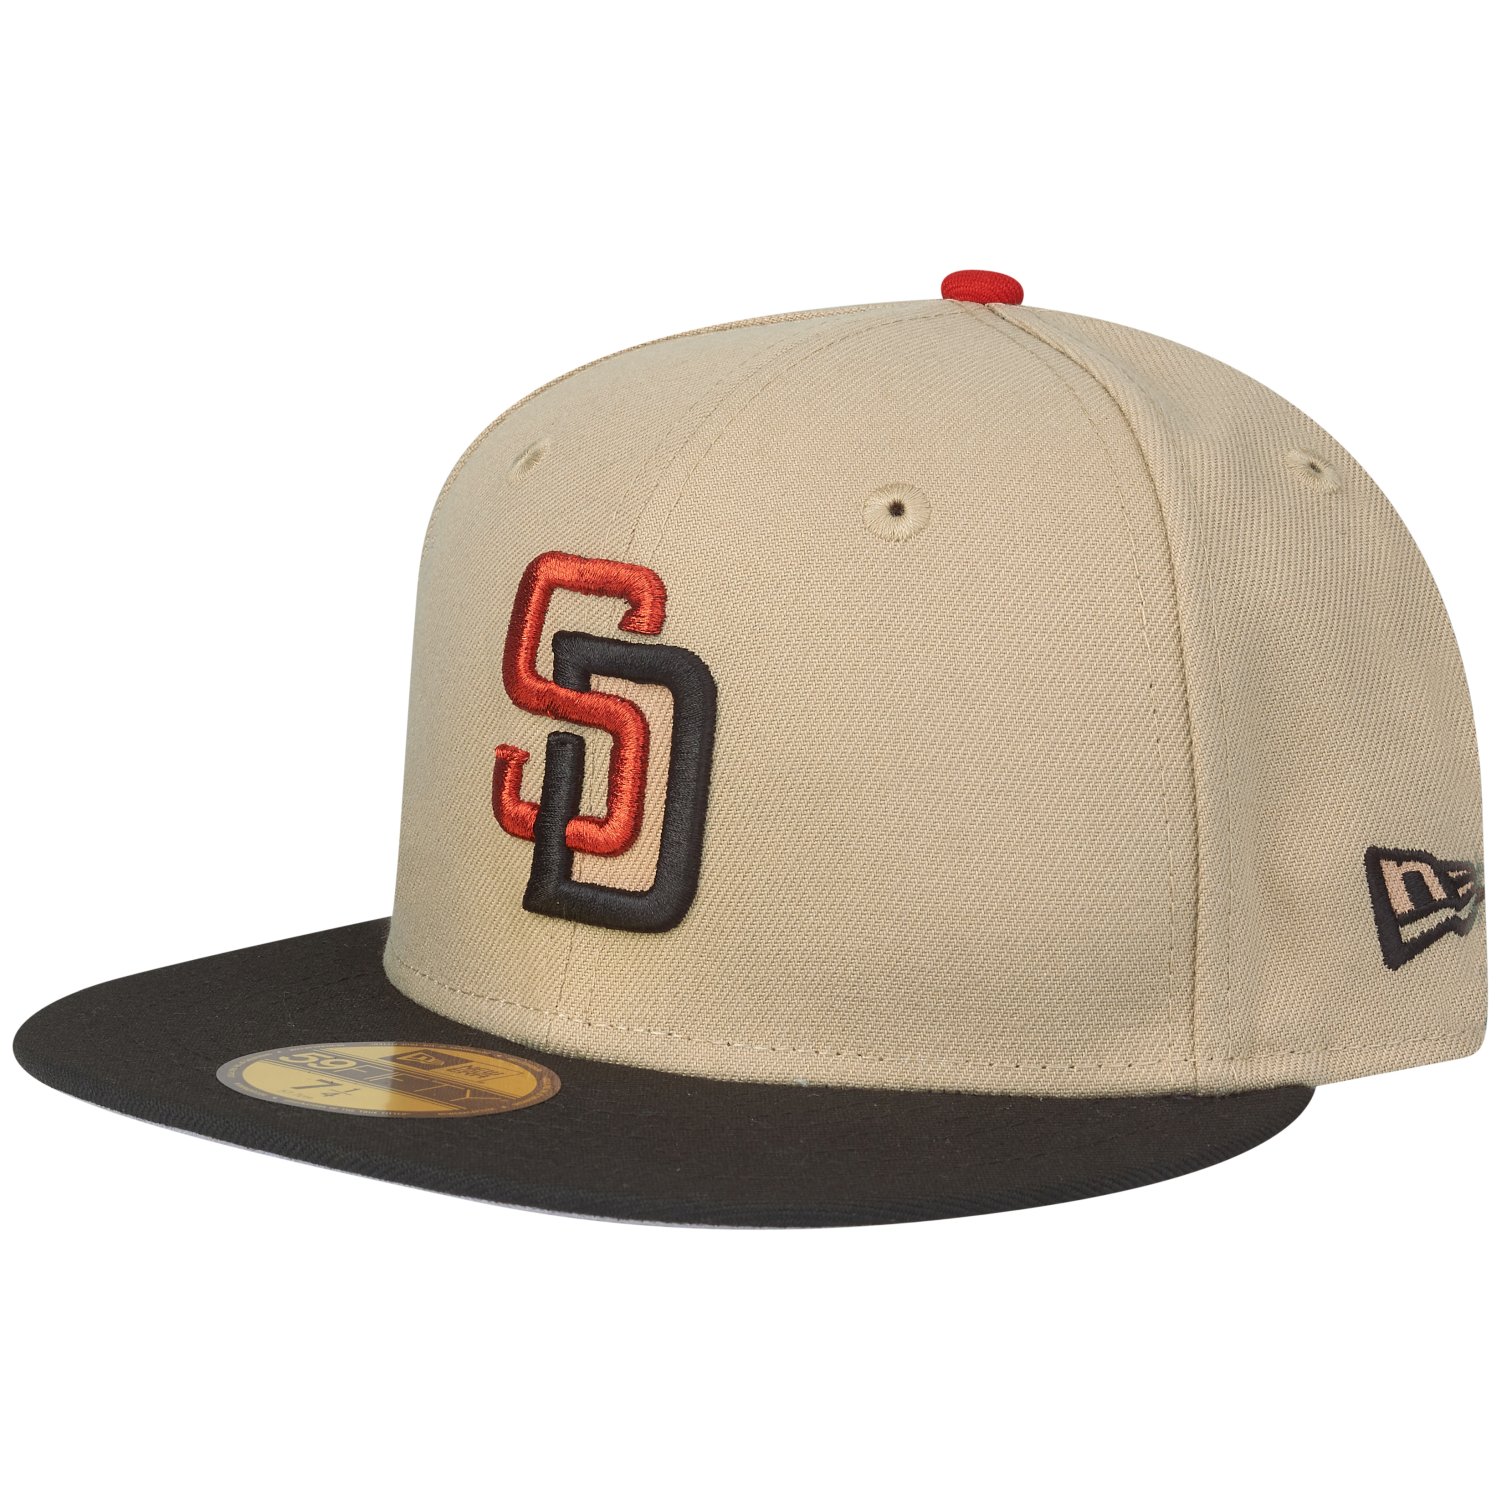 New Era 59Fifty Fitted Cap - San Diego Padres camel beige | Fitted ...